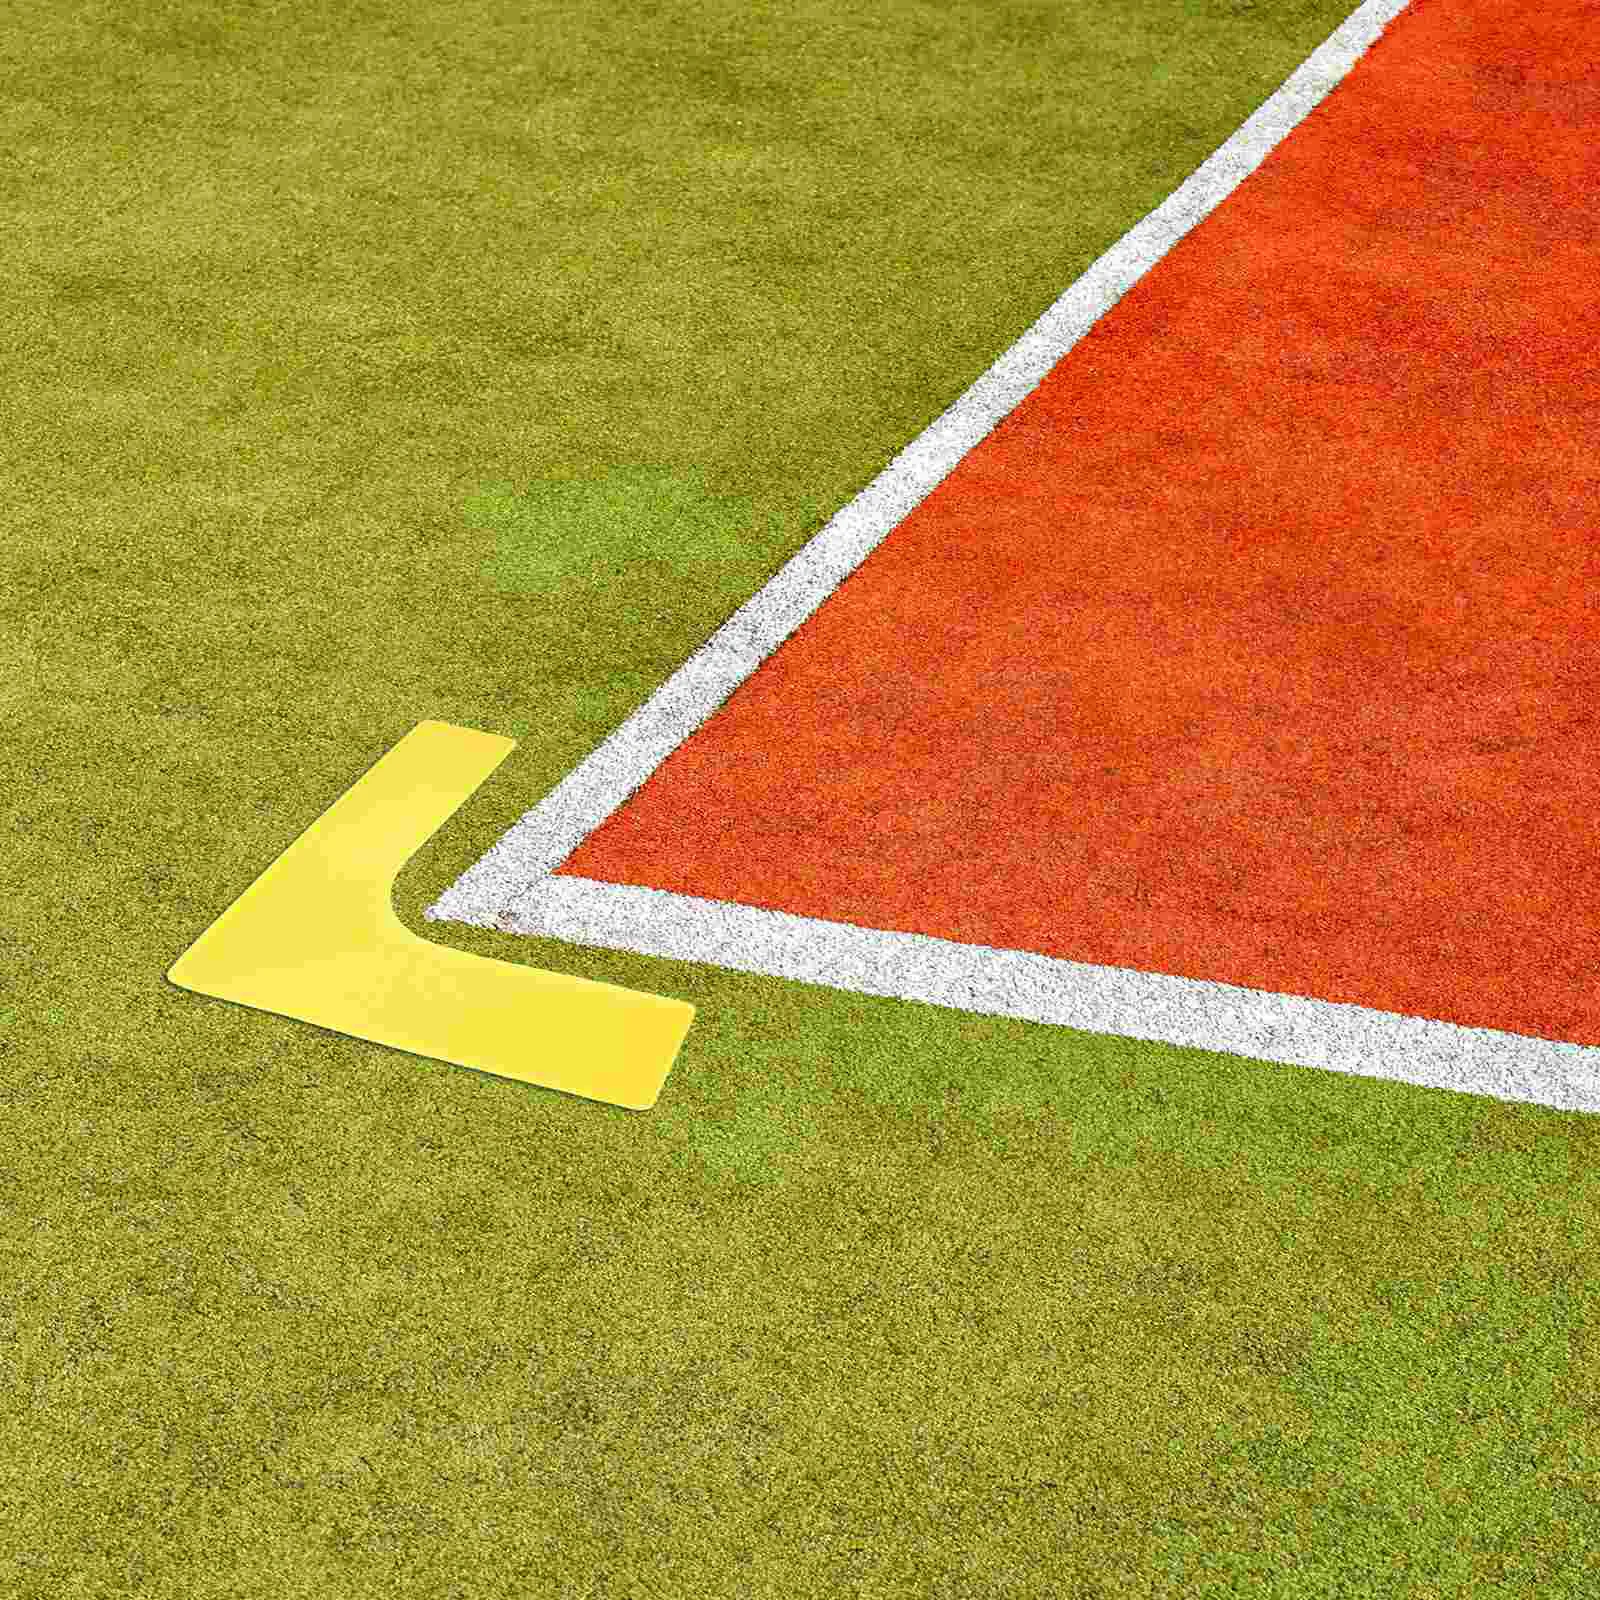 

Ground Marking Line Floor Markers Football Signs Spot Tennis Court Training Pads Flat Aids Round+rugs